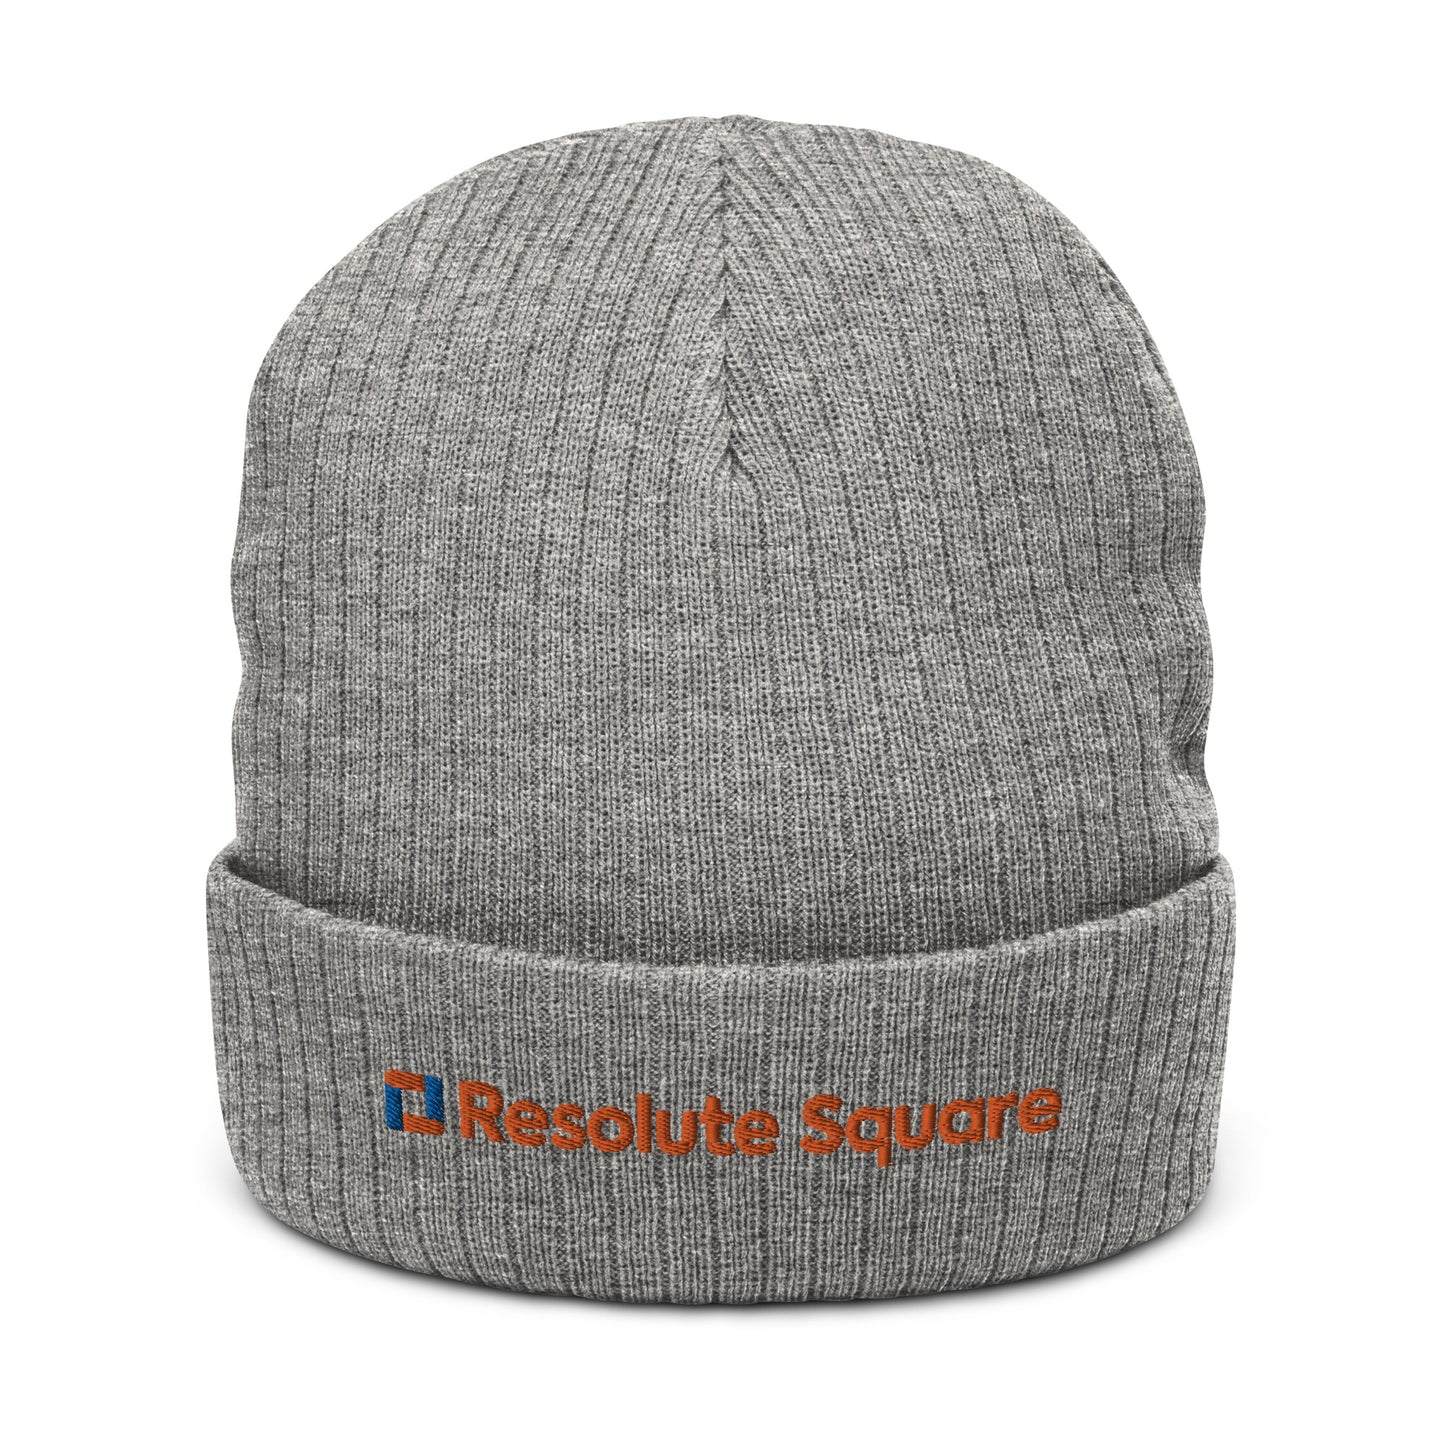 Resolute Square - Ribbed Knit Beanie